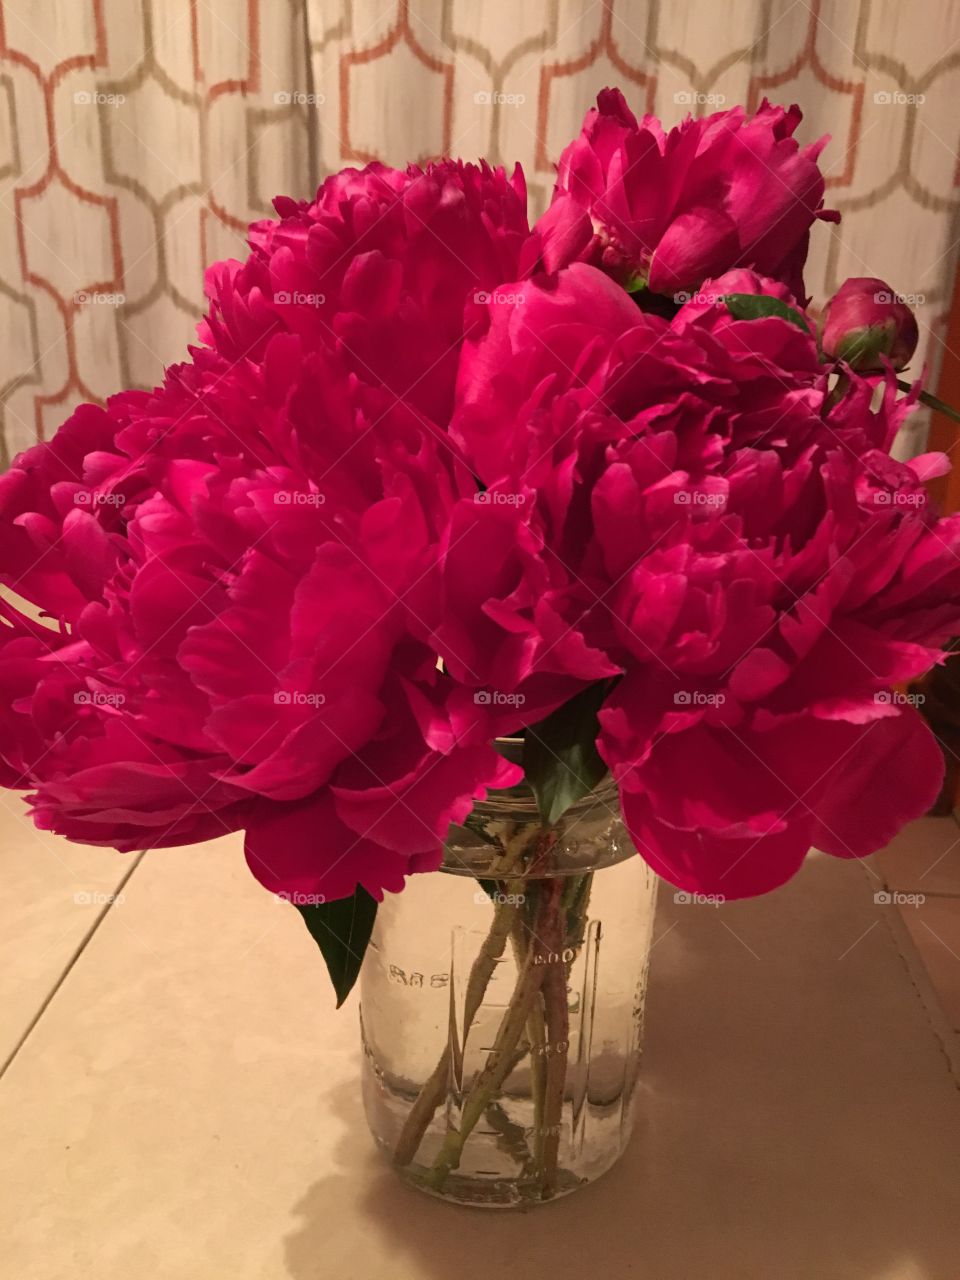 A night of playing cards with friends yields a beautiful, fragrant bouquet of peonies from their garden! 